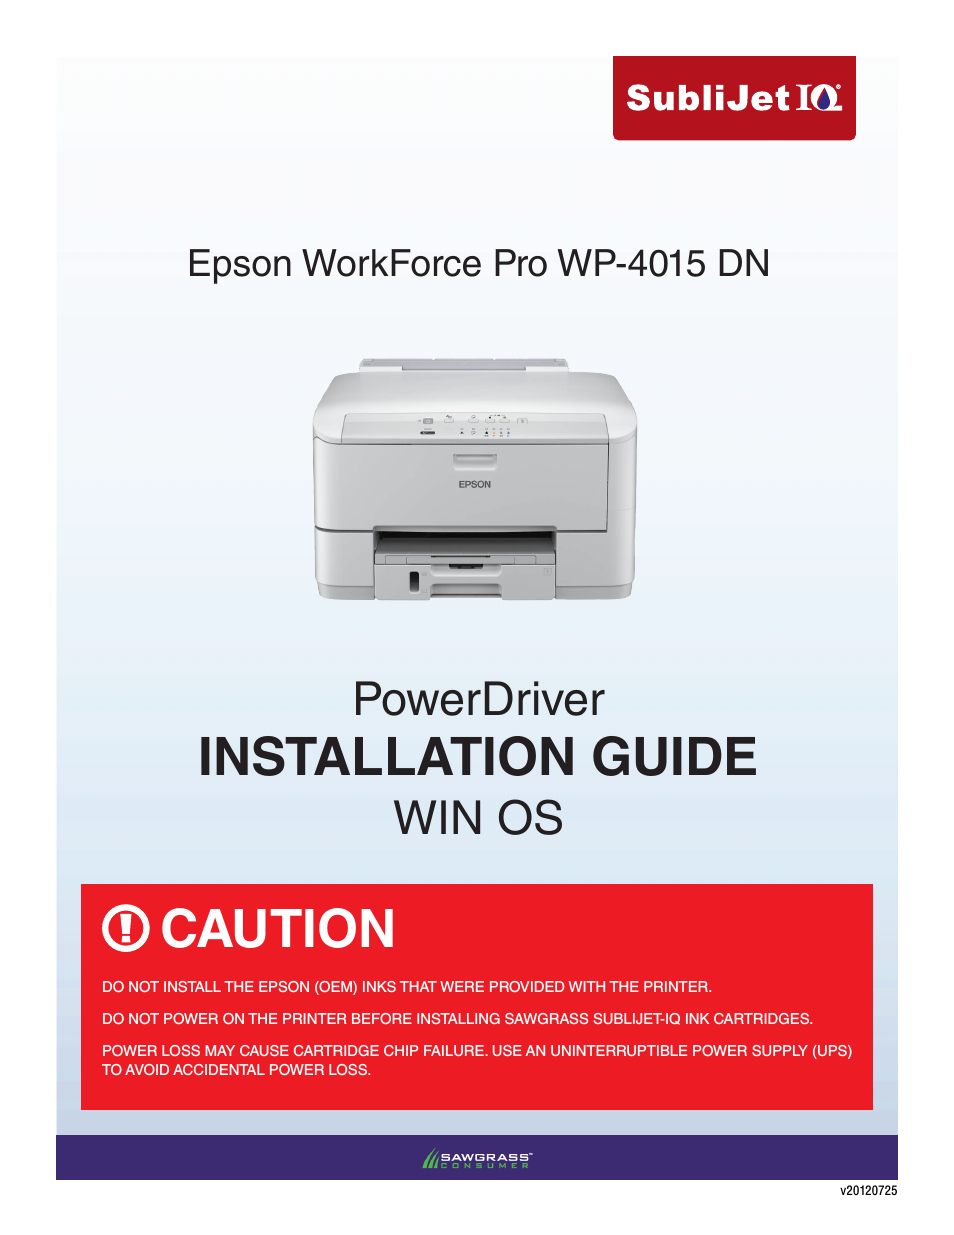 SubliJet IQ Epson WP-4015 (Power Driver Setup): Power Driver Installation Guide